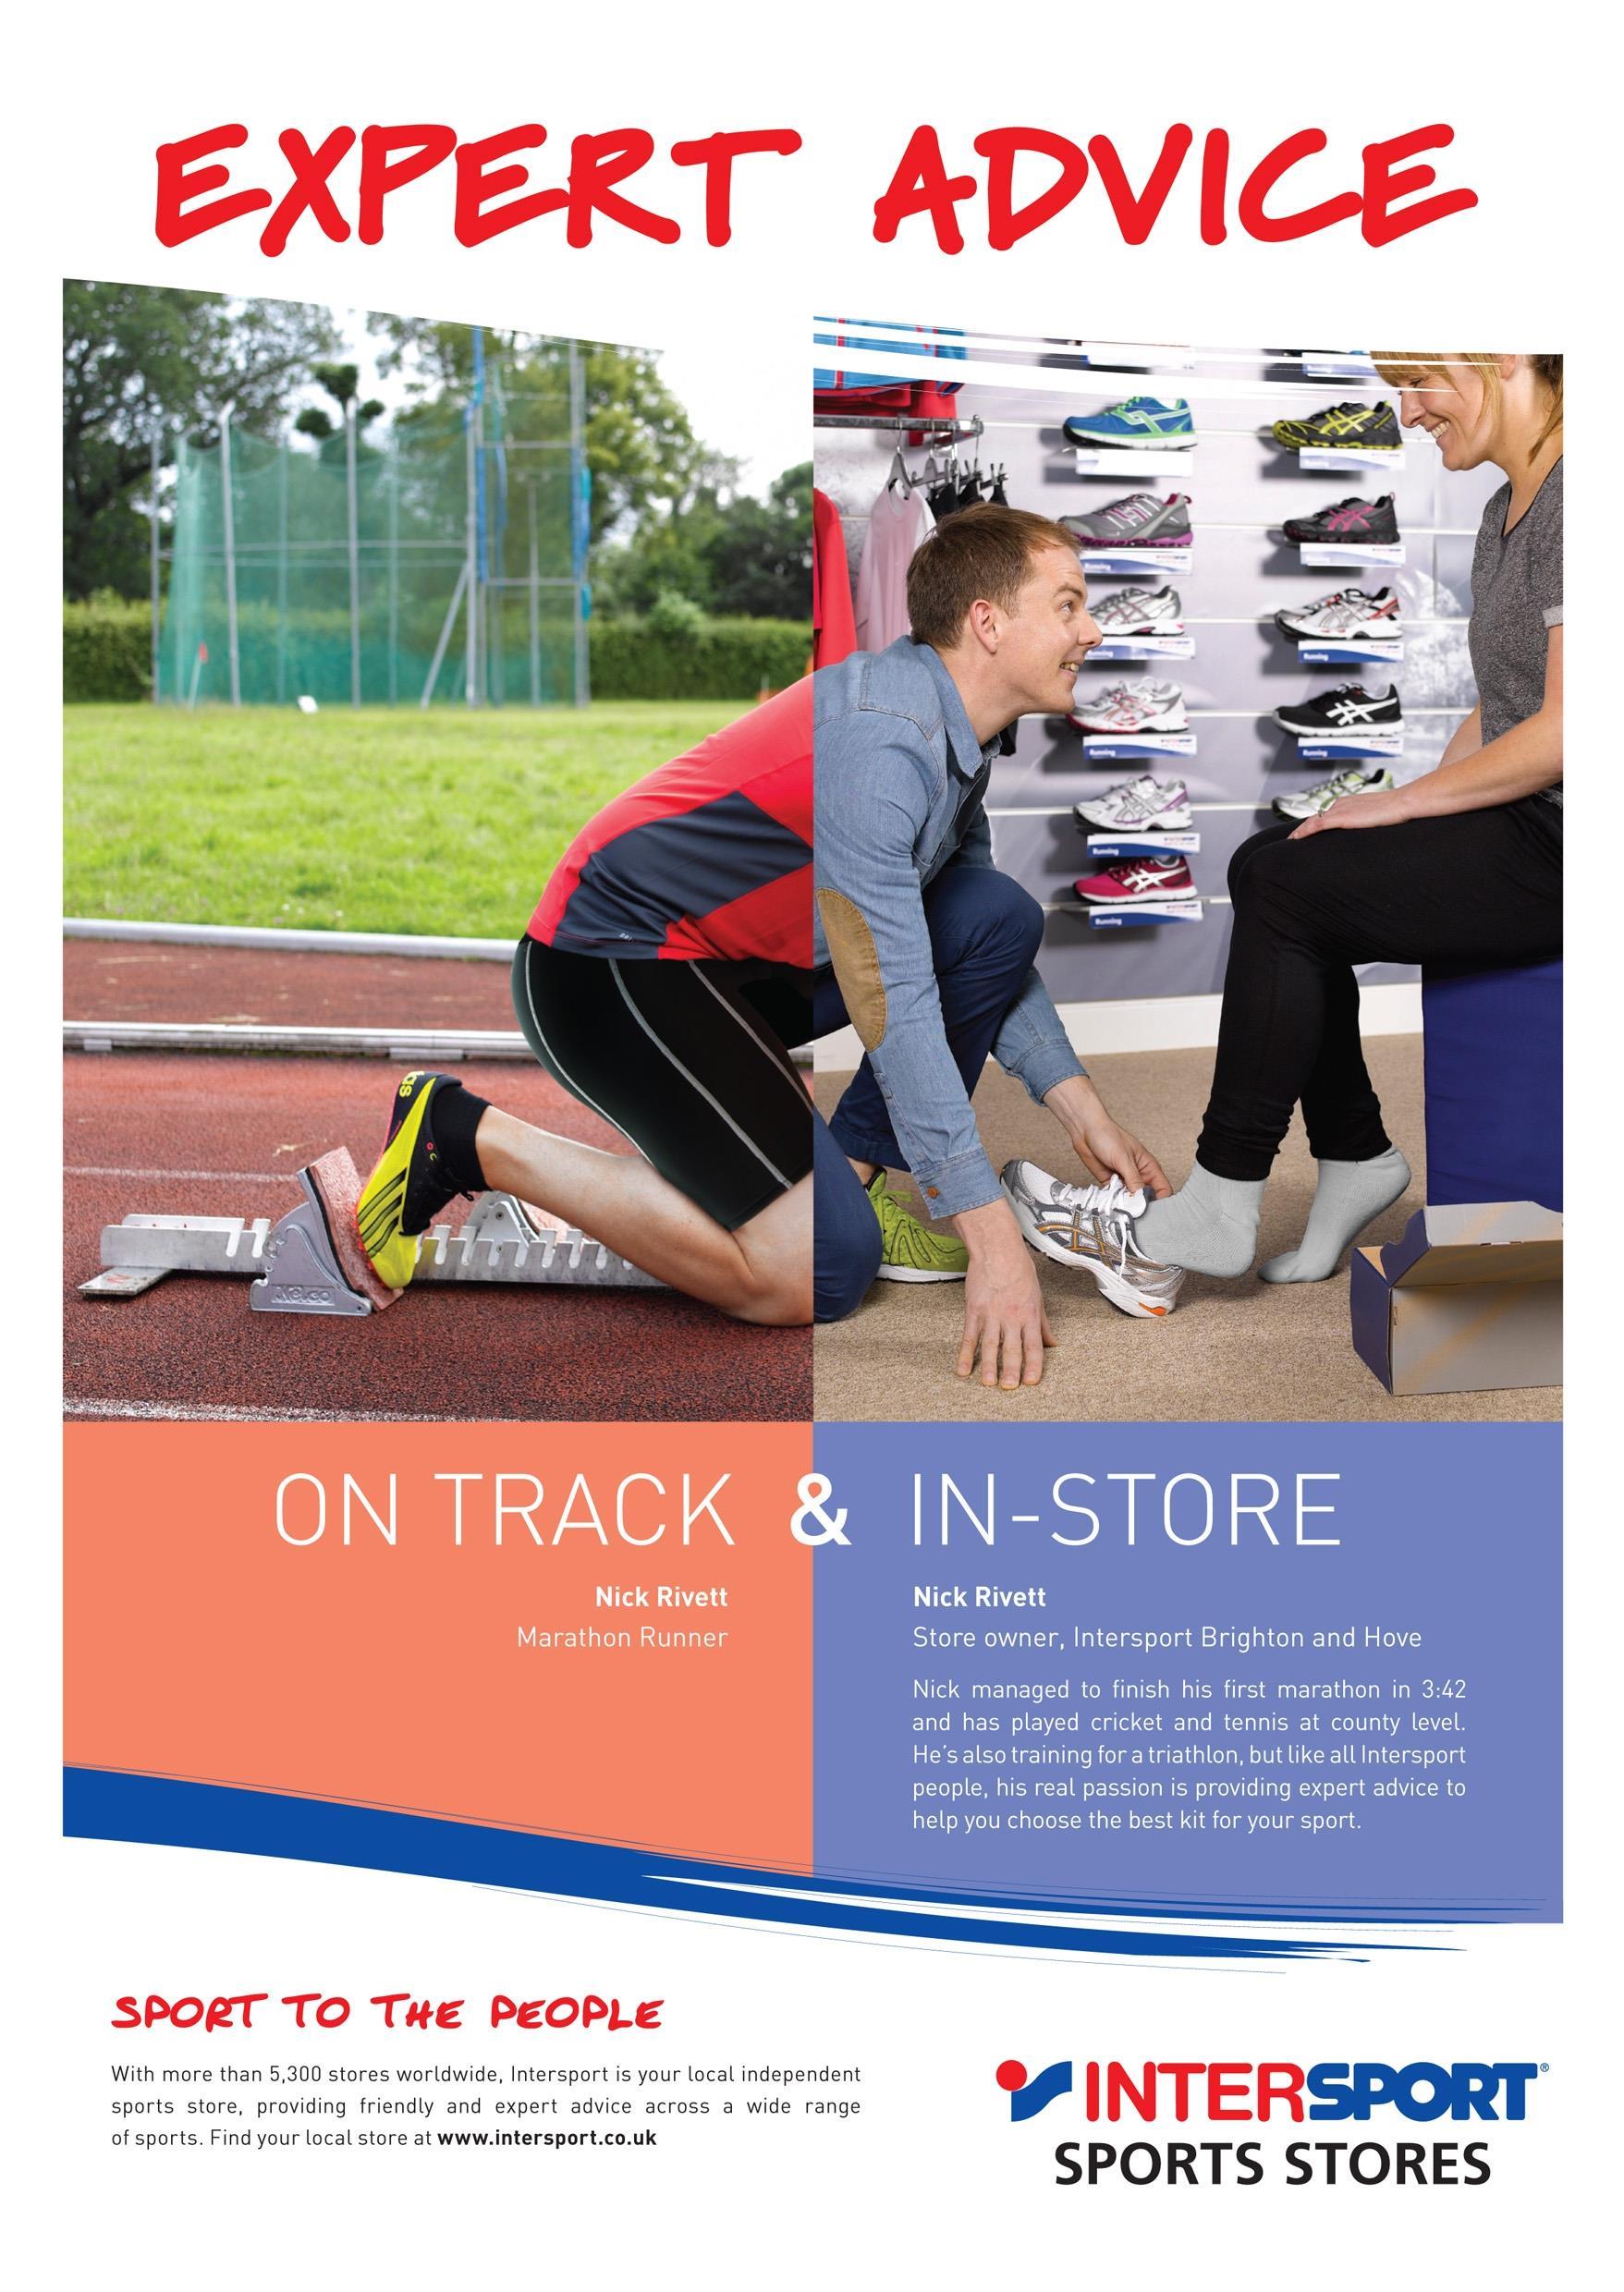 Decathlon bringing access and innovation to HRM sports, recreation and  outdoor lifestyles